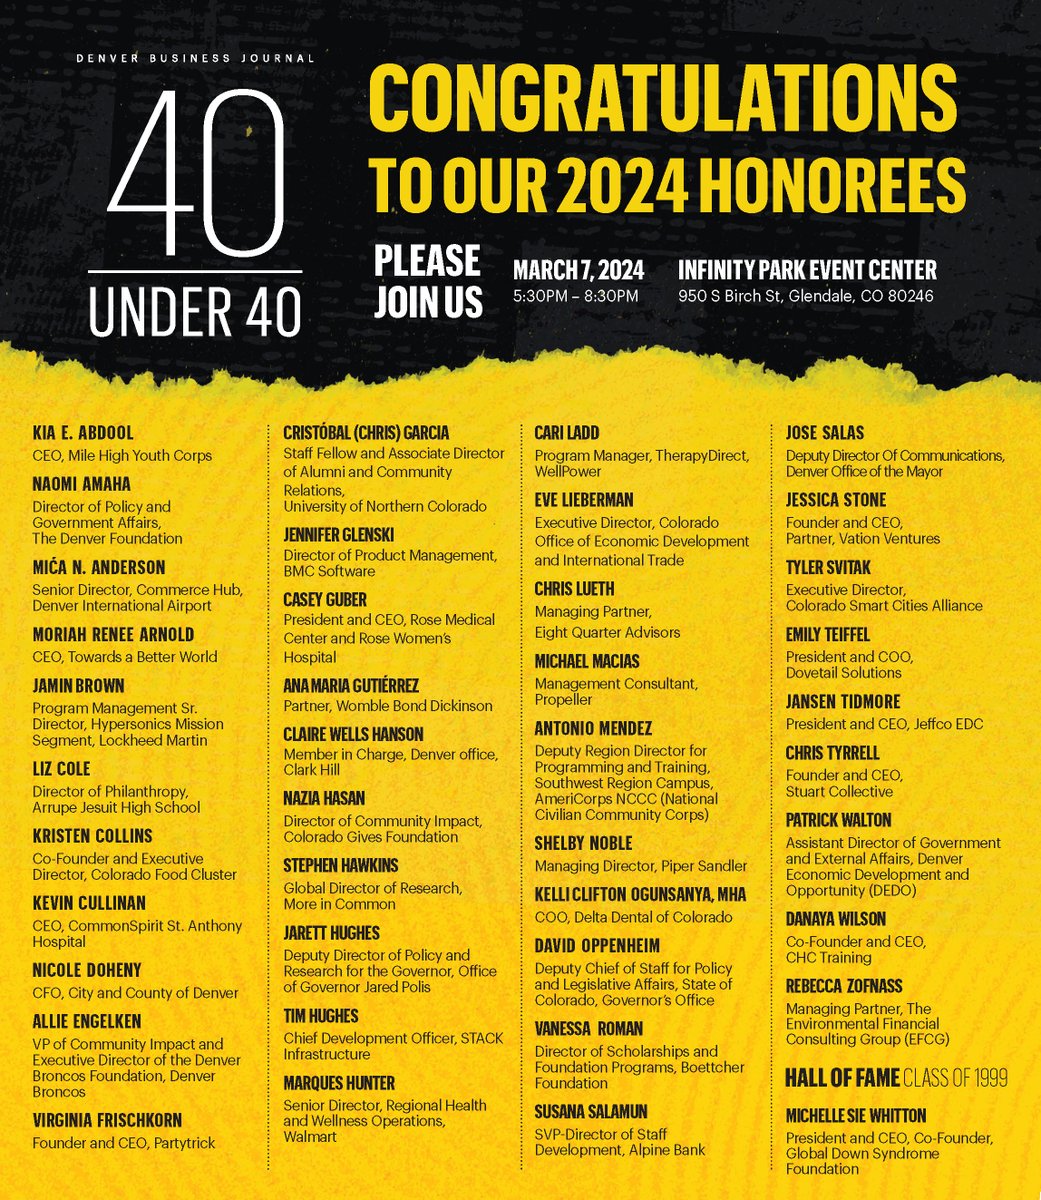 I'd like to again congratulate all of the 2024 @denbizjournal 40 Under 40 honorees on this amazing accomplishment. #SiSePuede #PaLante #Colorado #40Under40